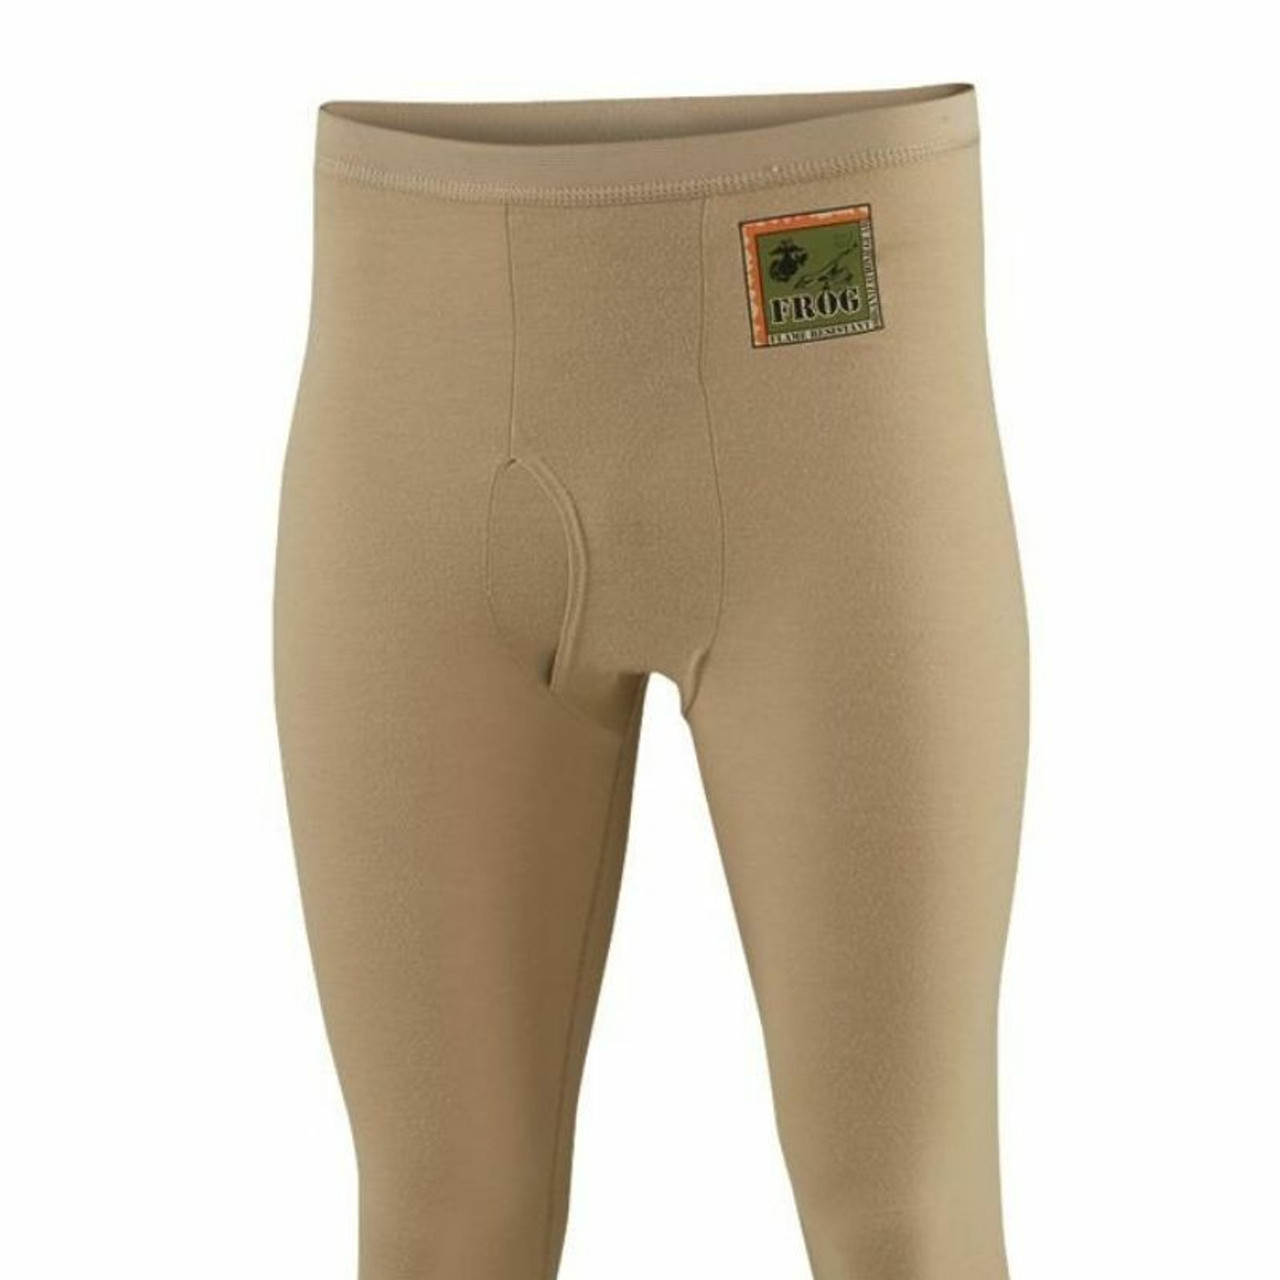 Buy Rothco Long Underwear Bottoms ECWCS Level 1 'Next-to-skin', Money Back  Guarantee